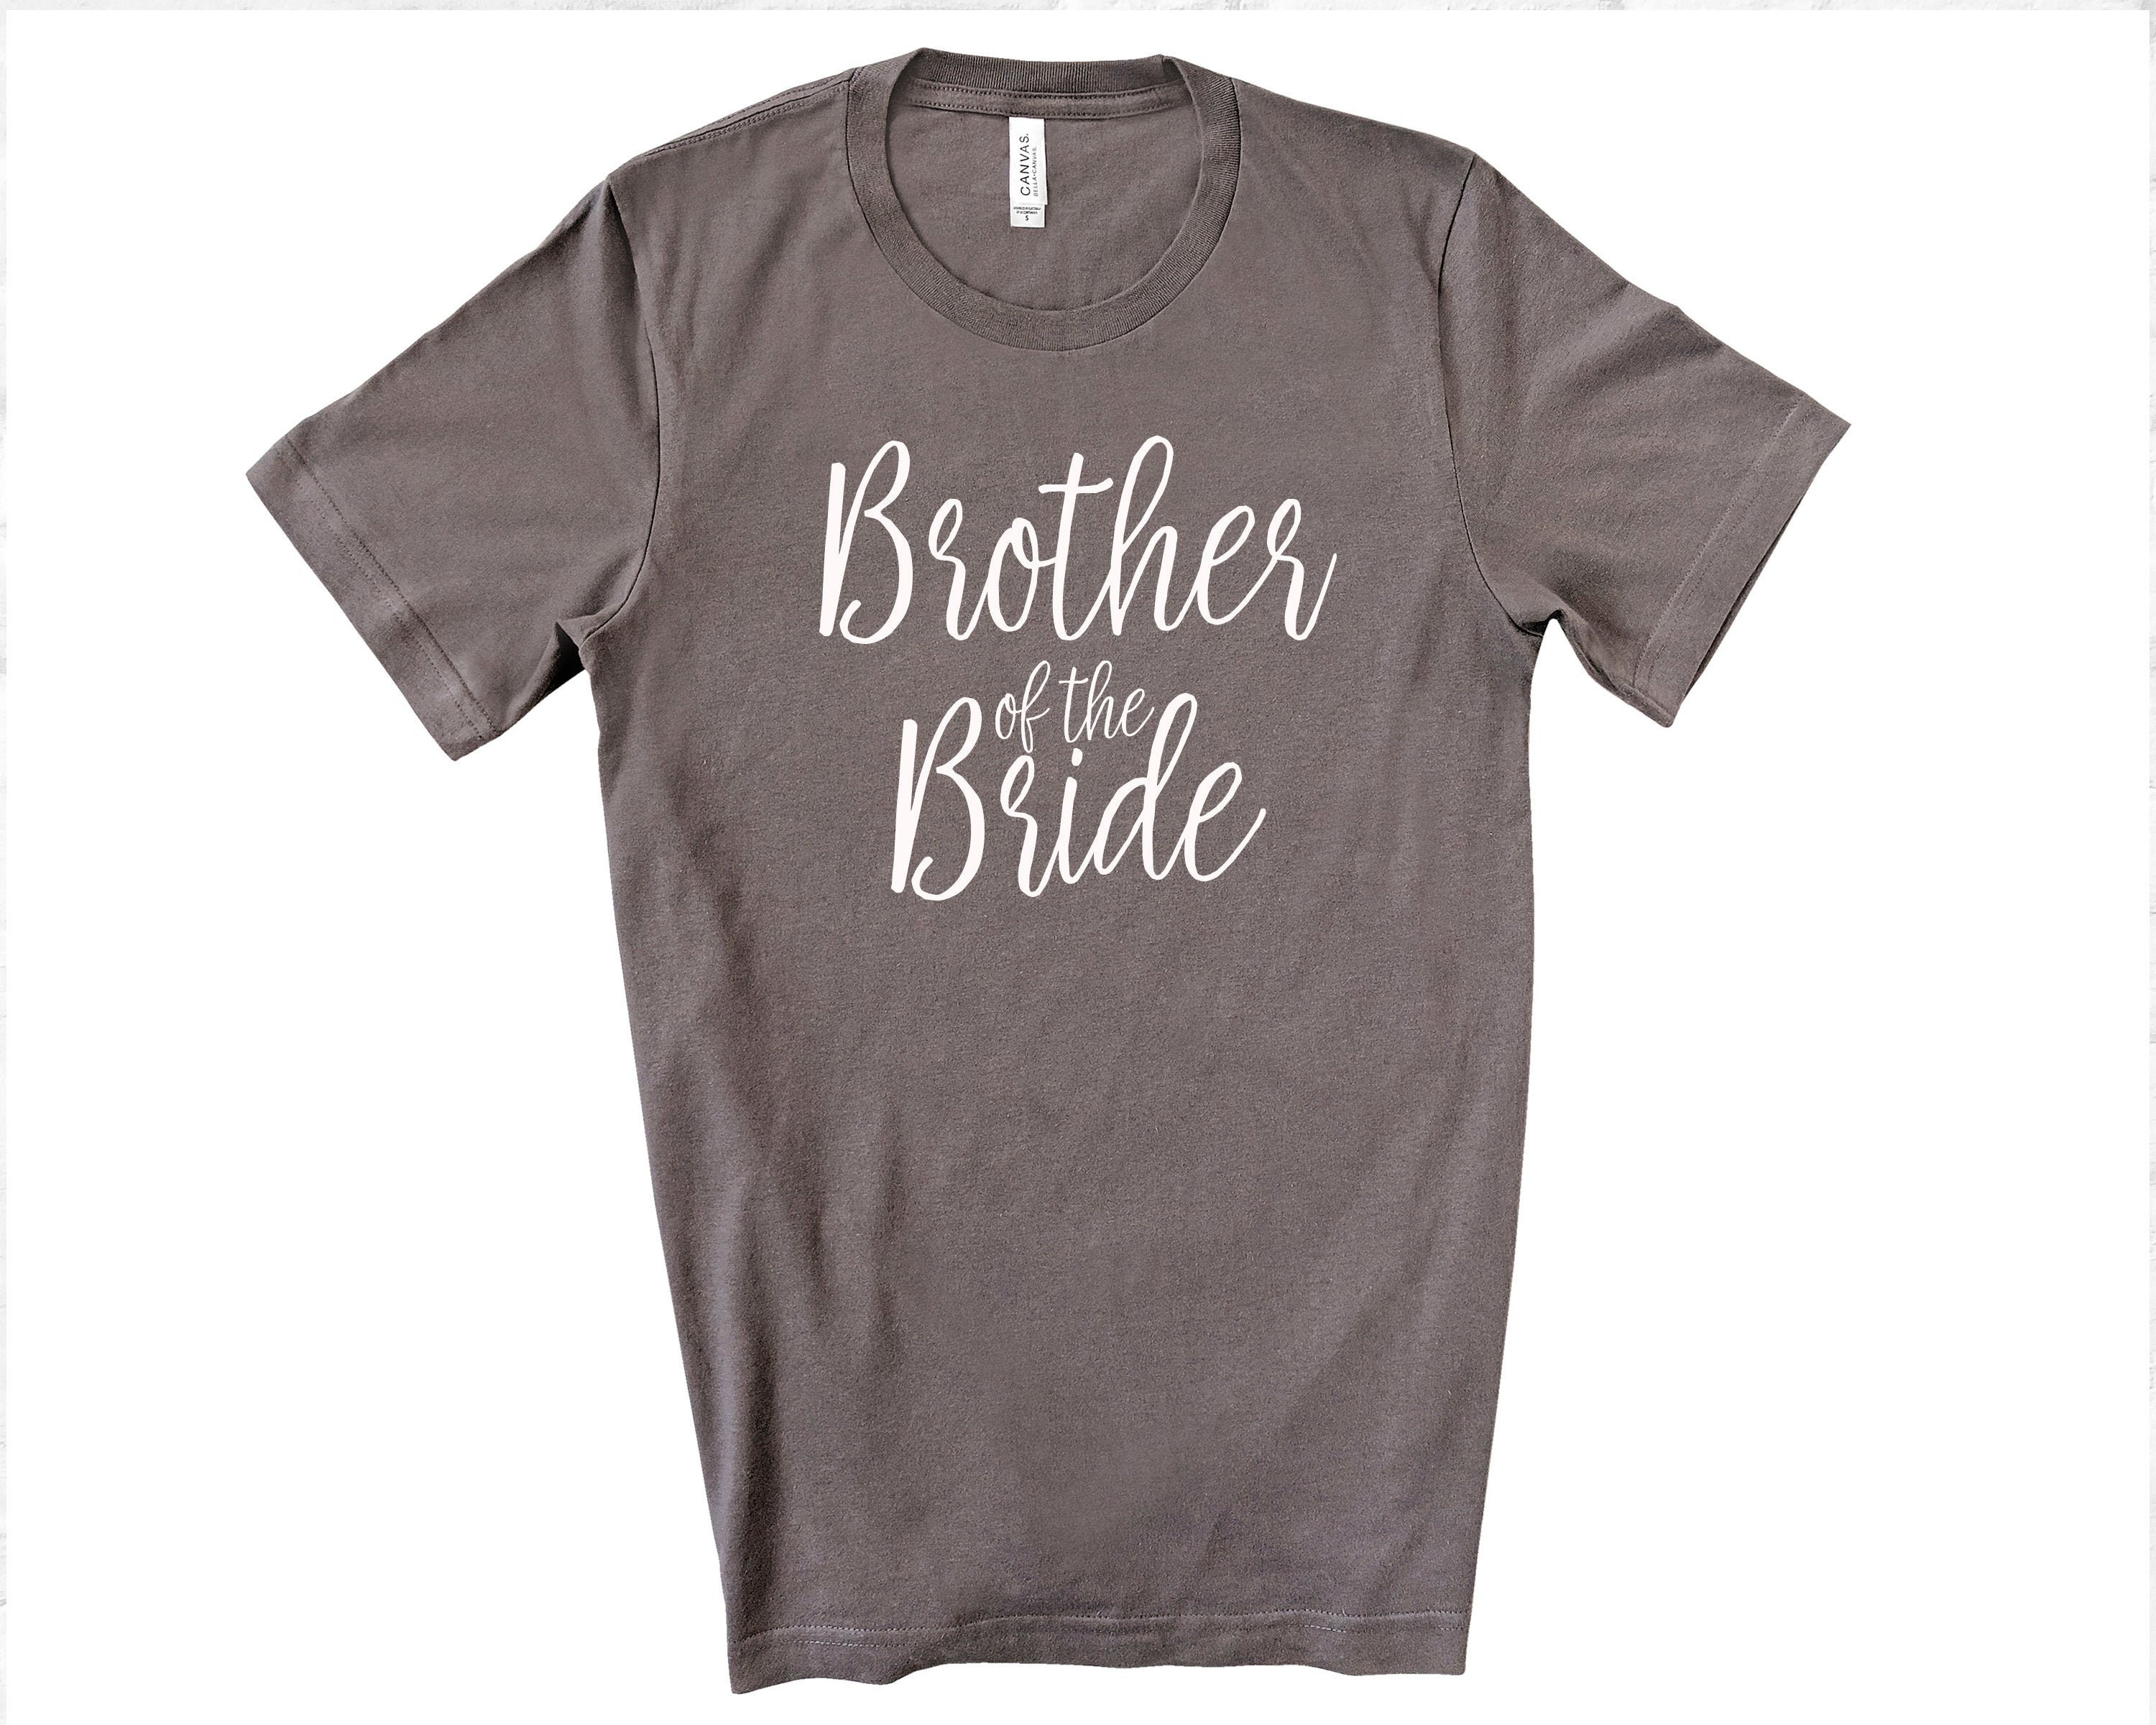 Brother of the Bride Shirt Bachelor Party Shirts Bridal | Etsy